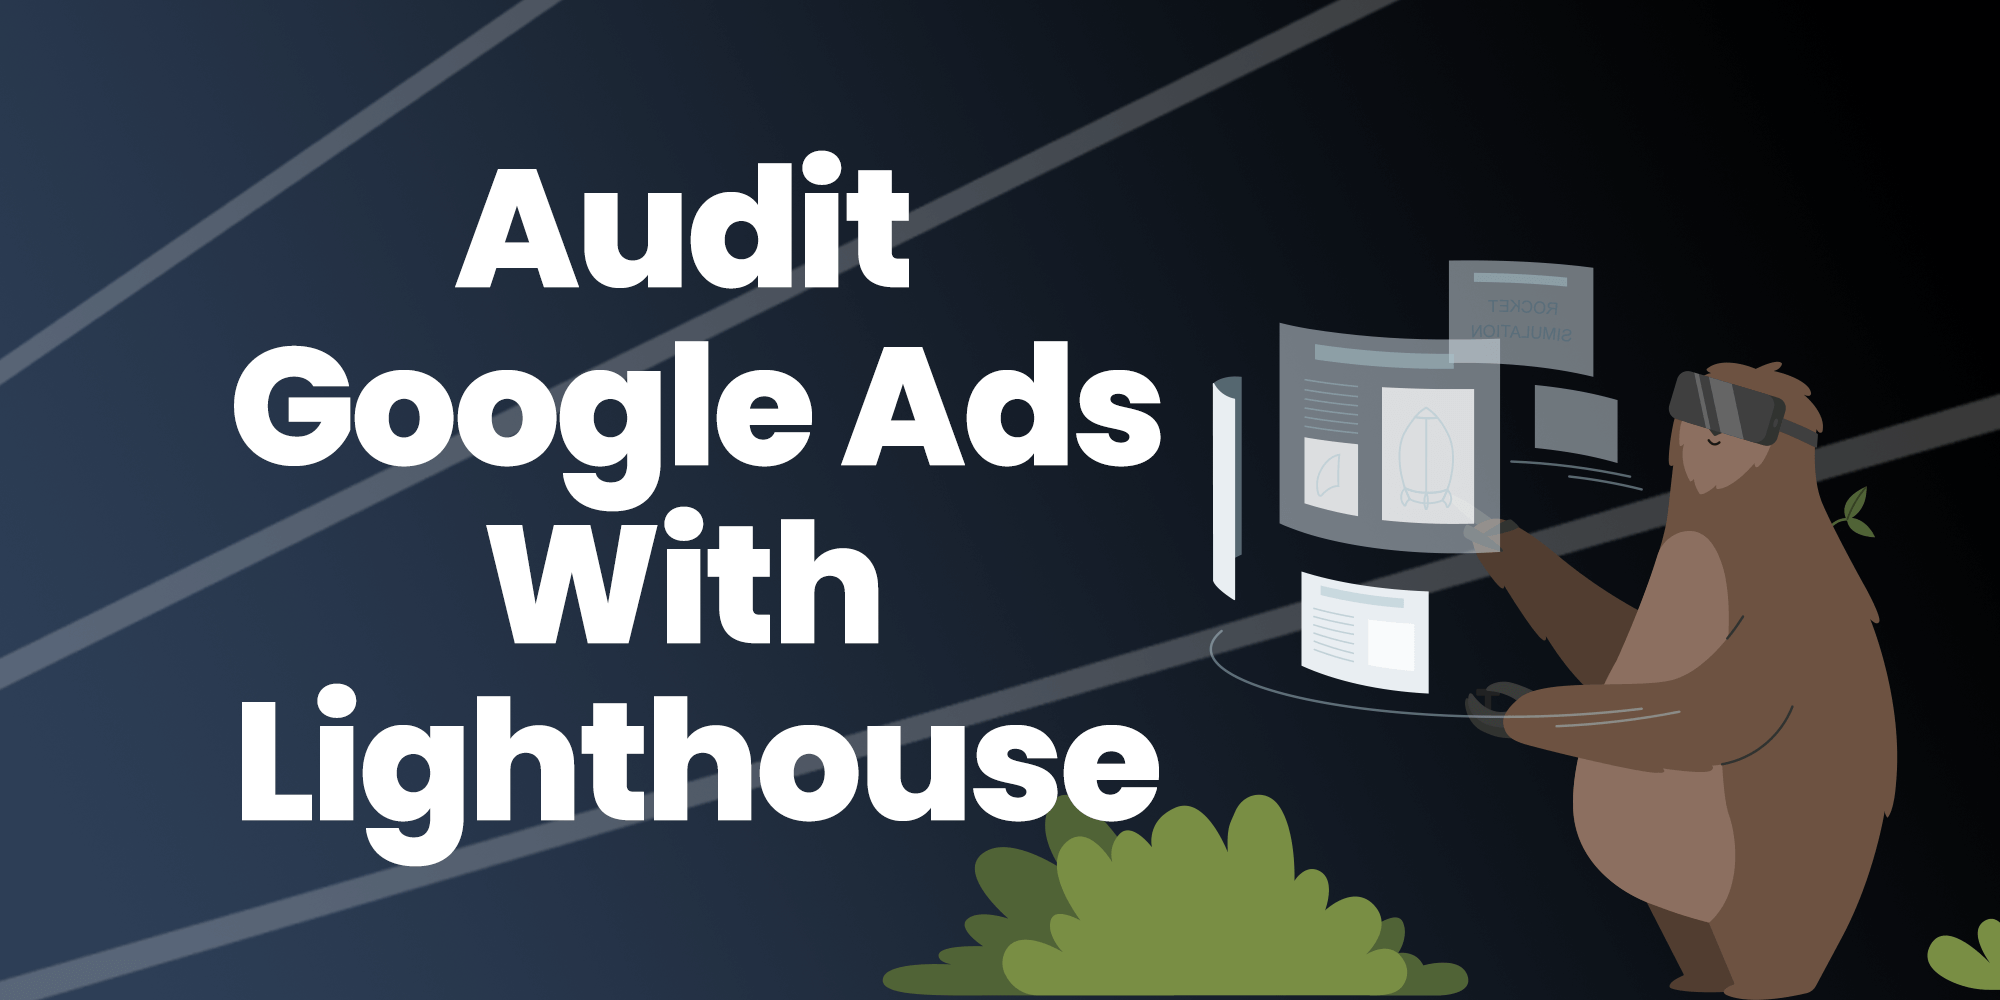 Audit Google Ad Performance With Lighthouse